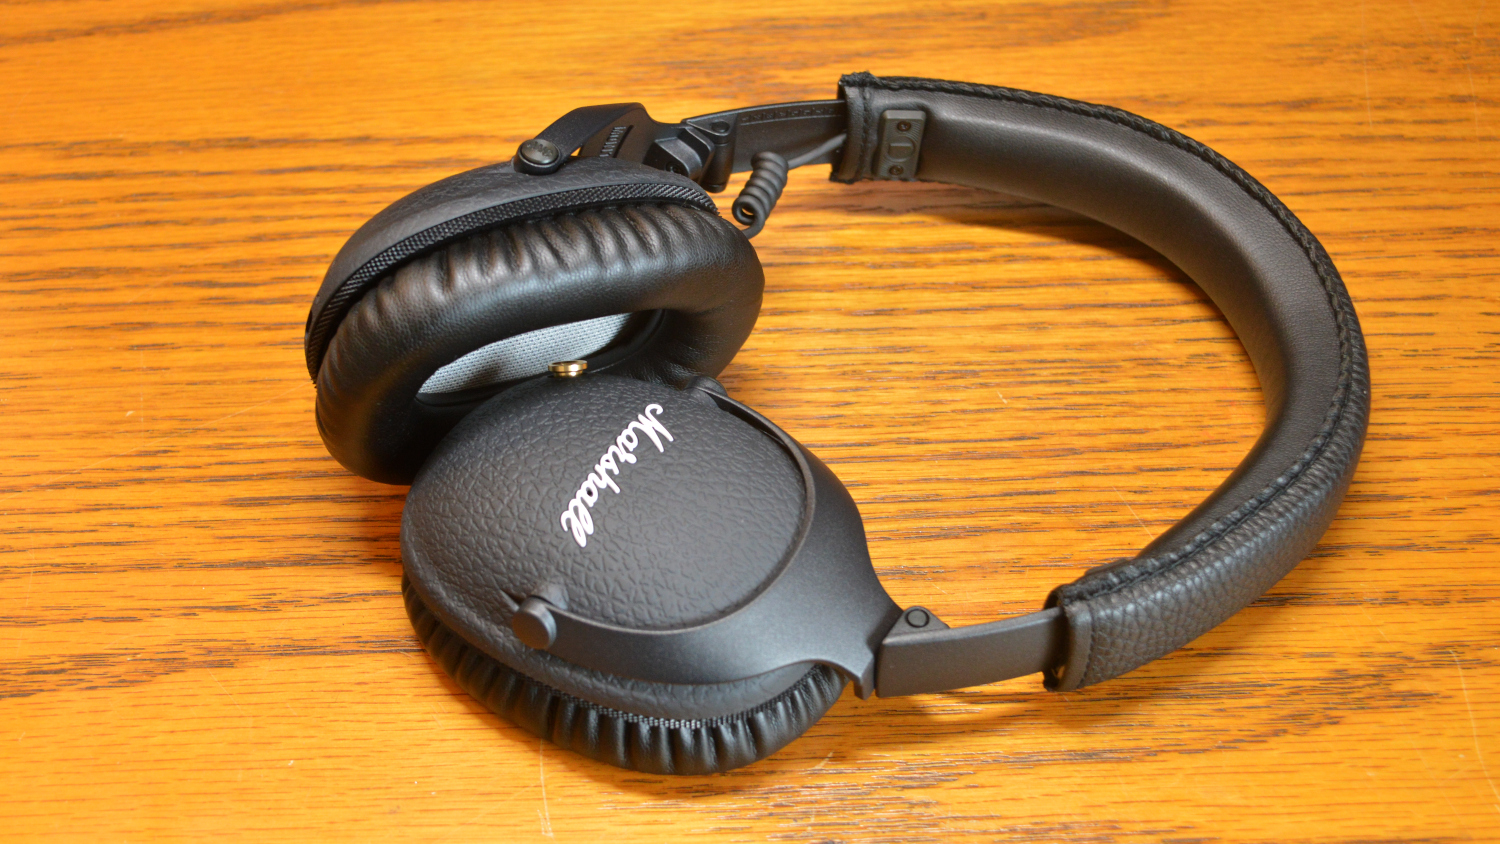 Marshall Monitor II ANC Over-Ear Headphones Review - Headphone Review